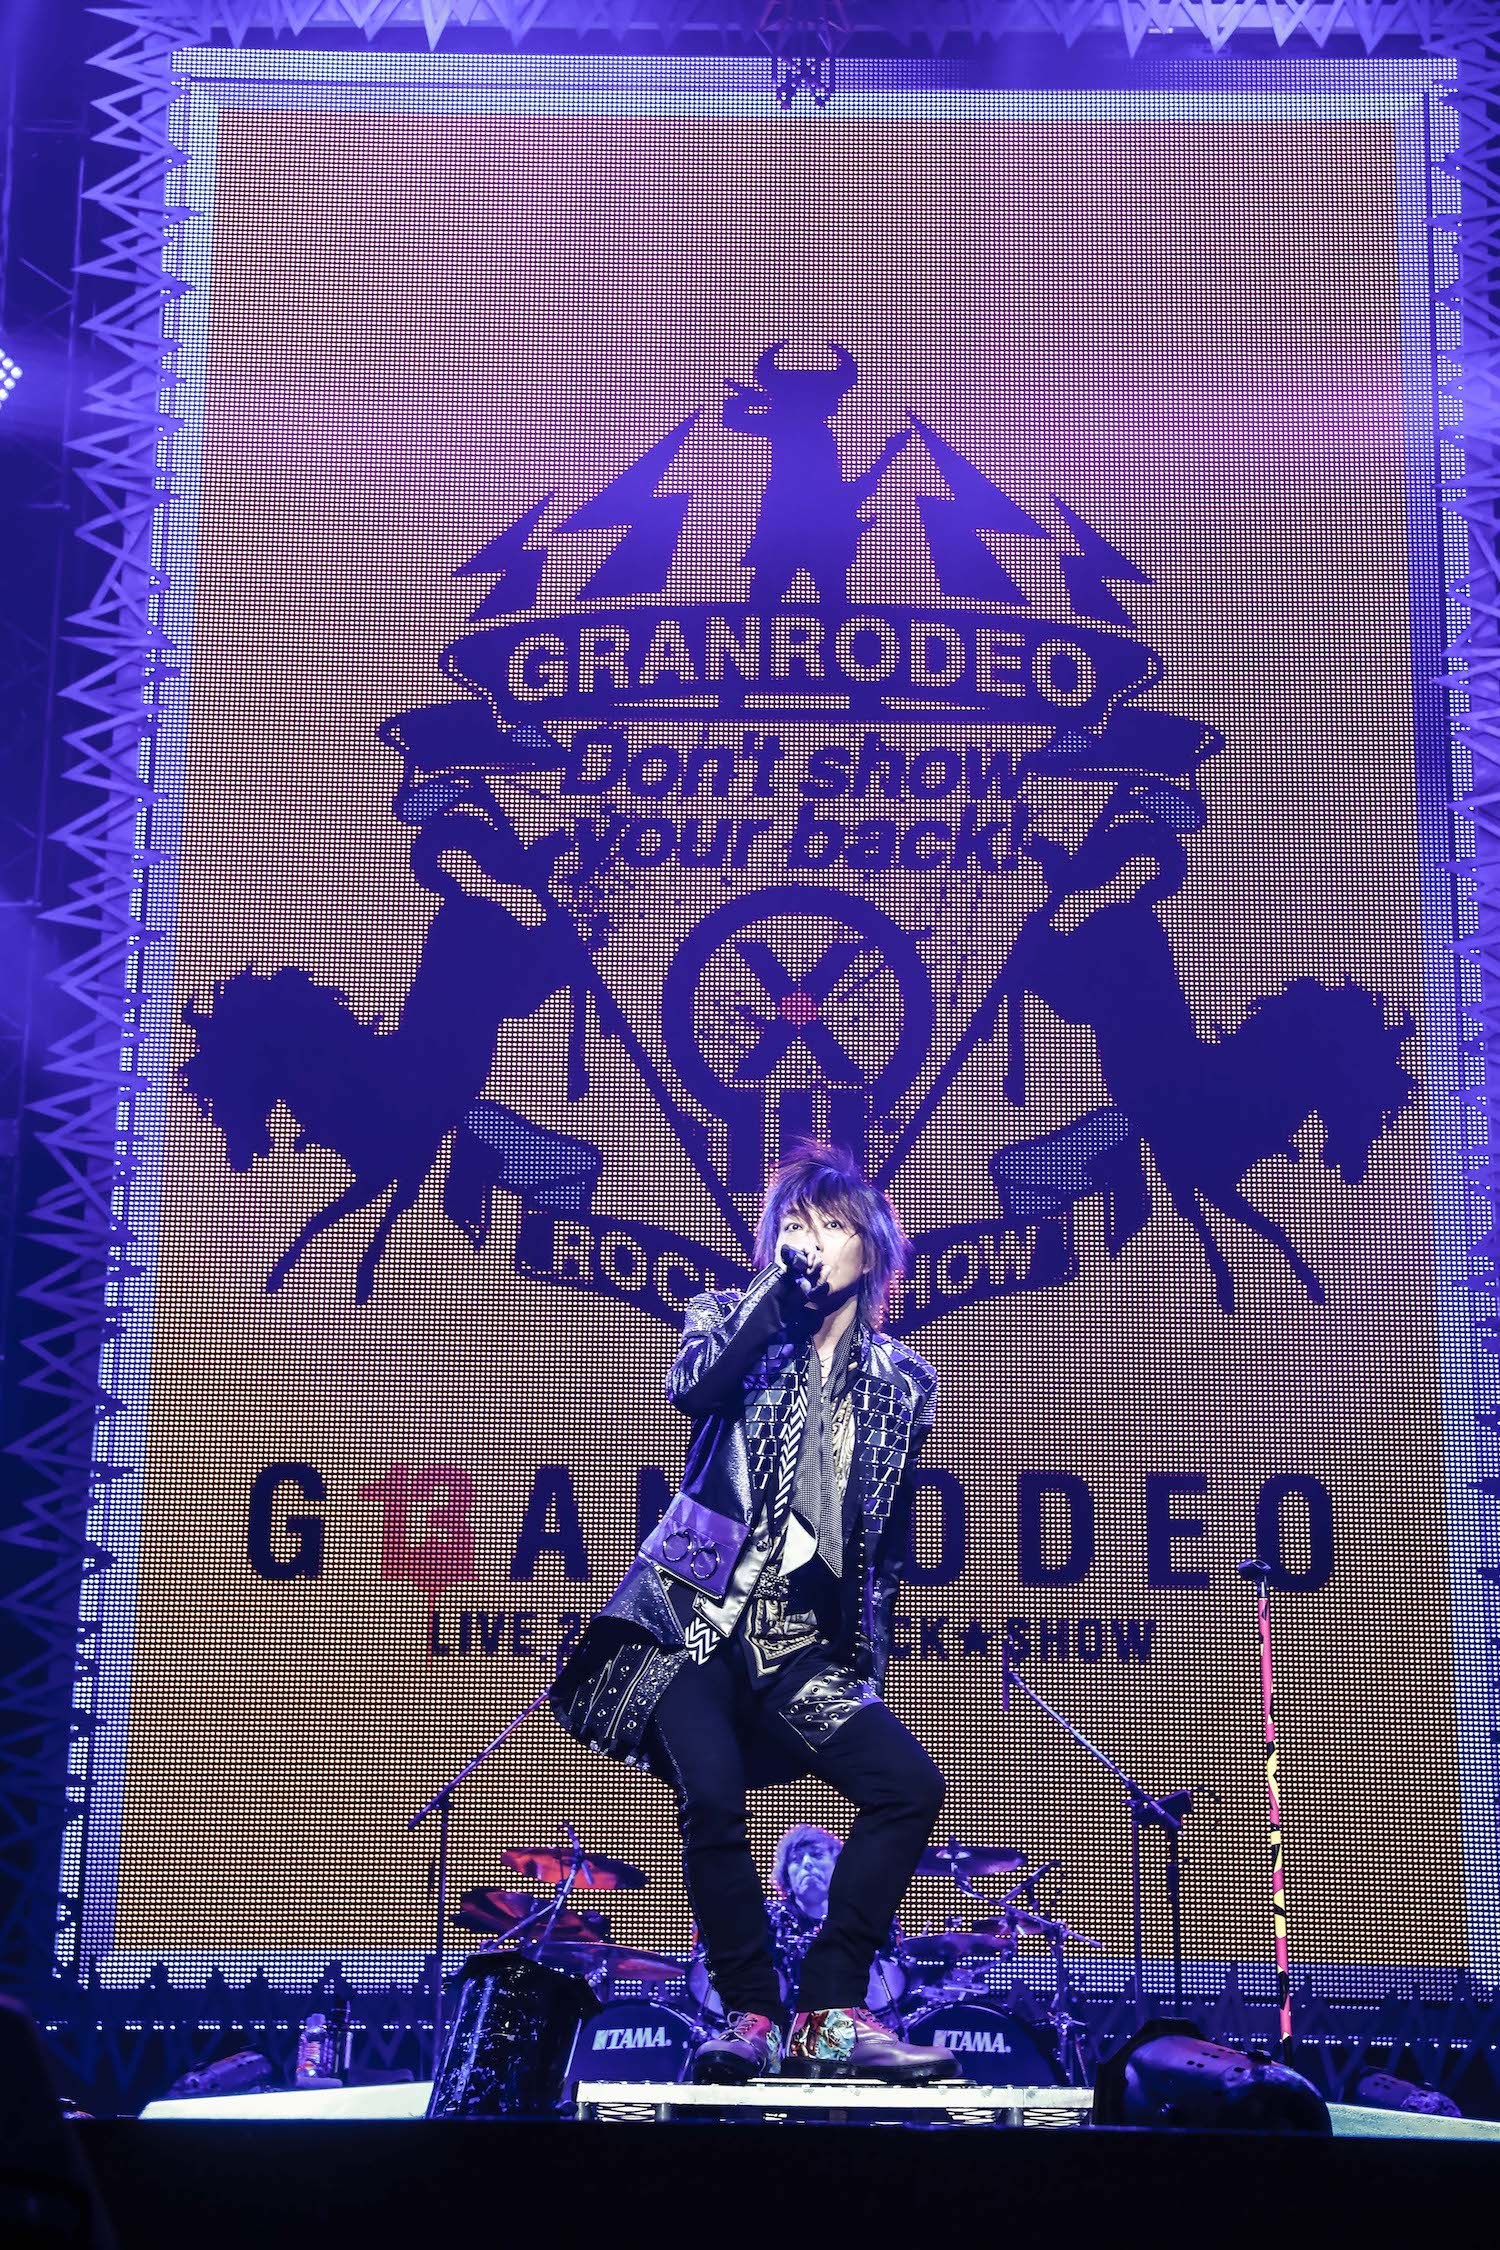 GRANRODEO 『GRANRODEO LIVE 2018 G13 ROCK☆SHOW "Don't show your back!"』